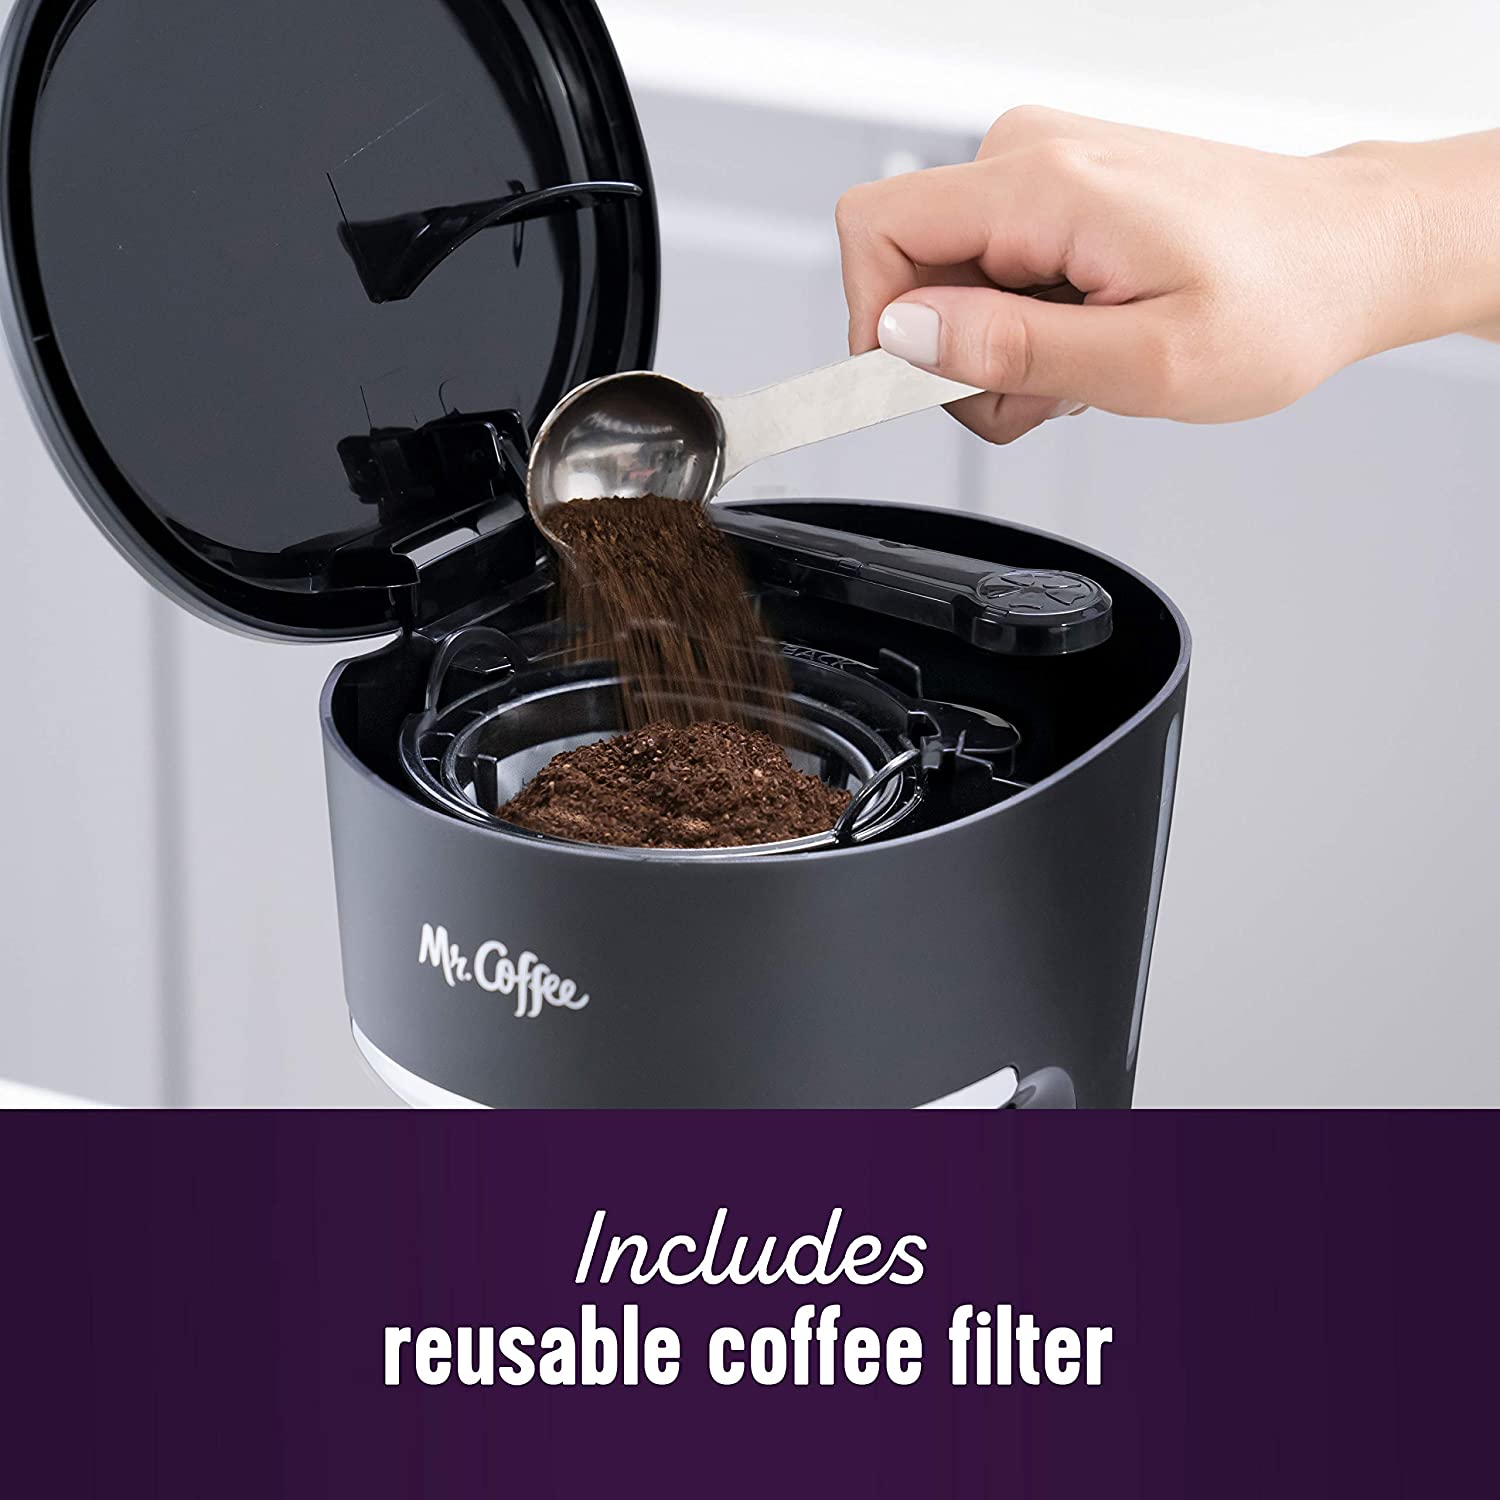 Mr. Coffee 5 Cup Programmable 25 oz. Mini, Brew Now or Later, Coffee Maker, Black - image 4 of 5